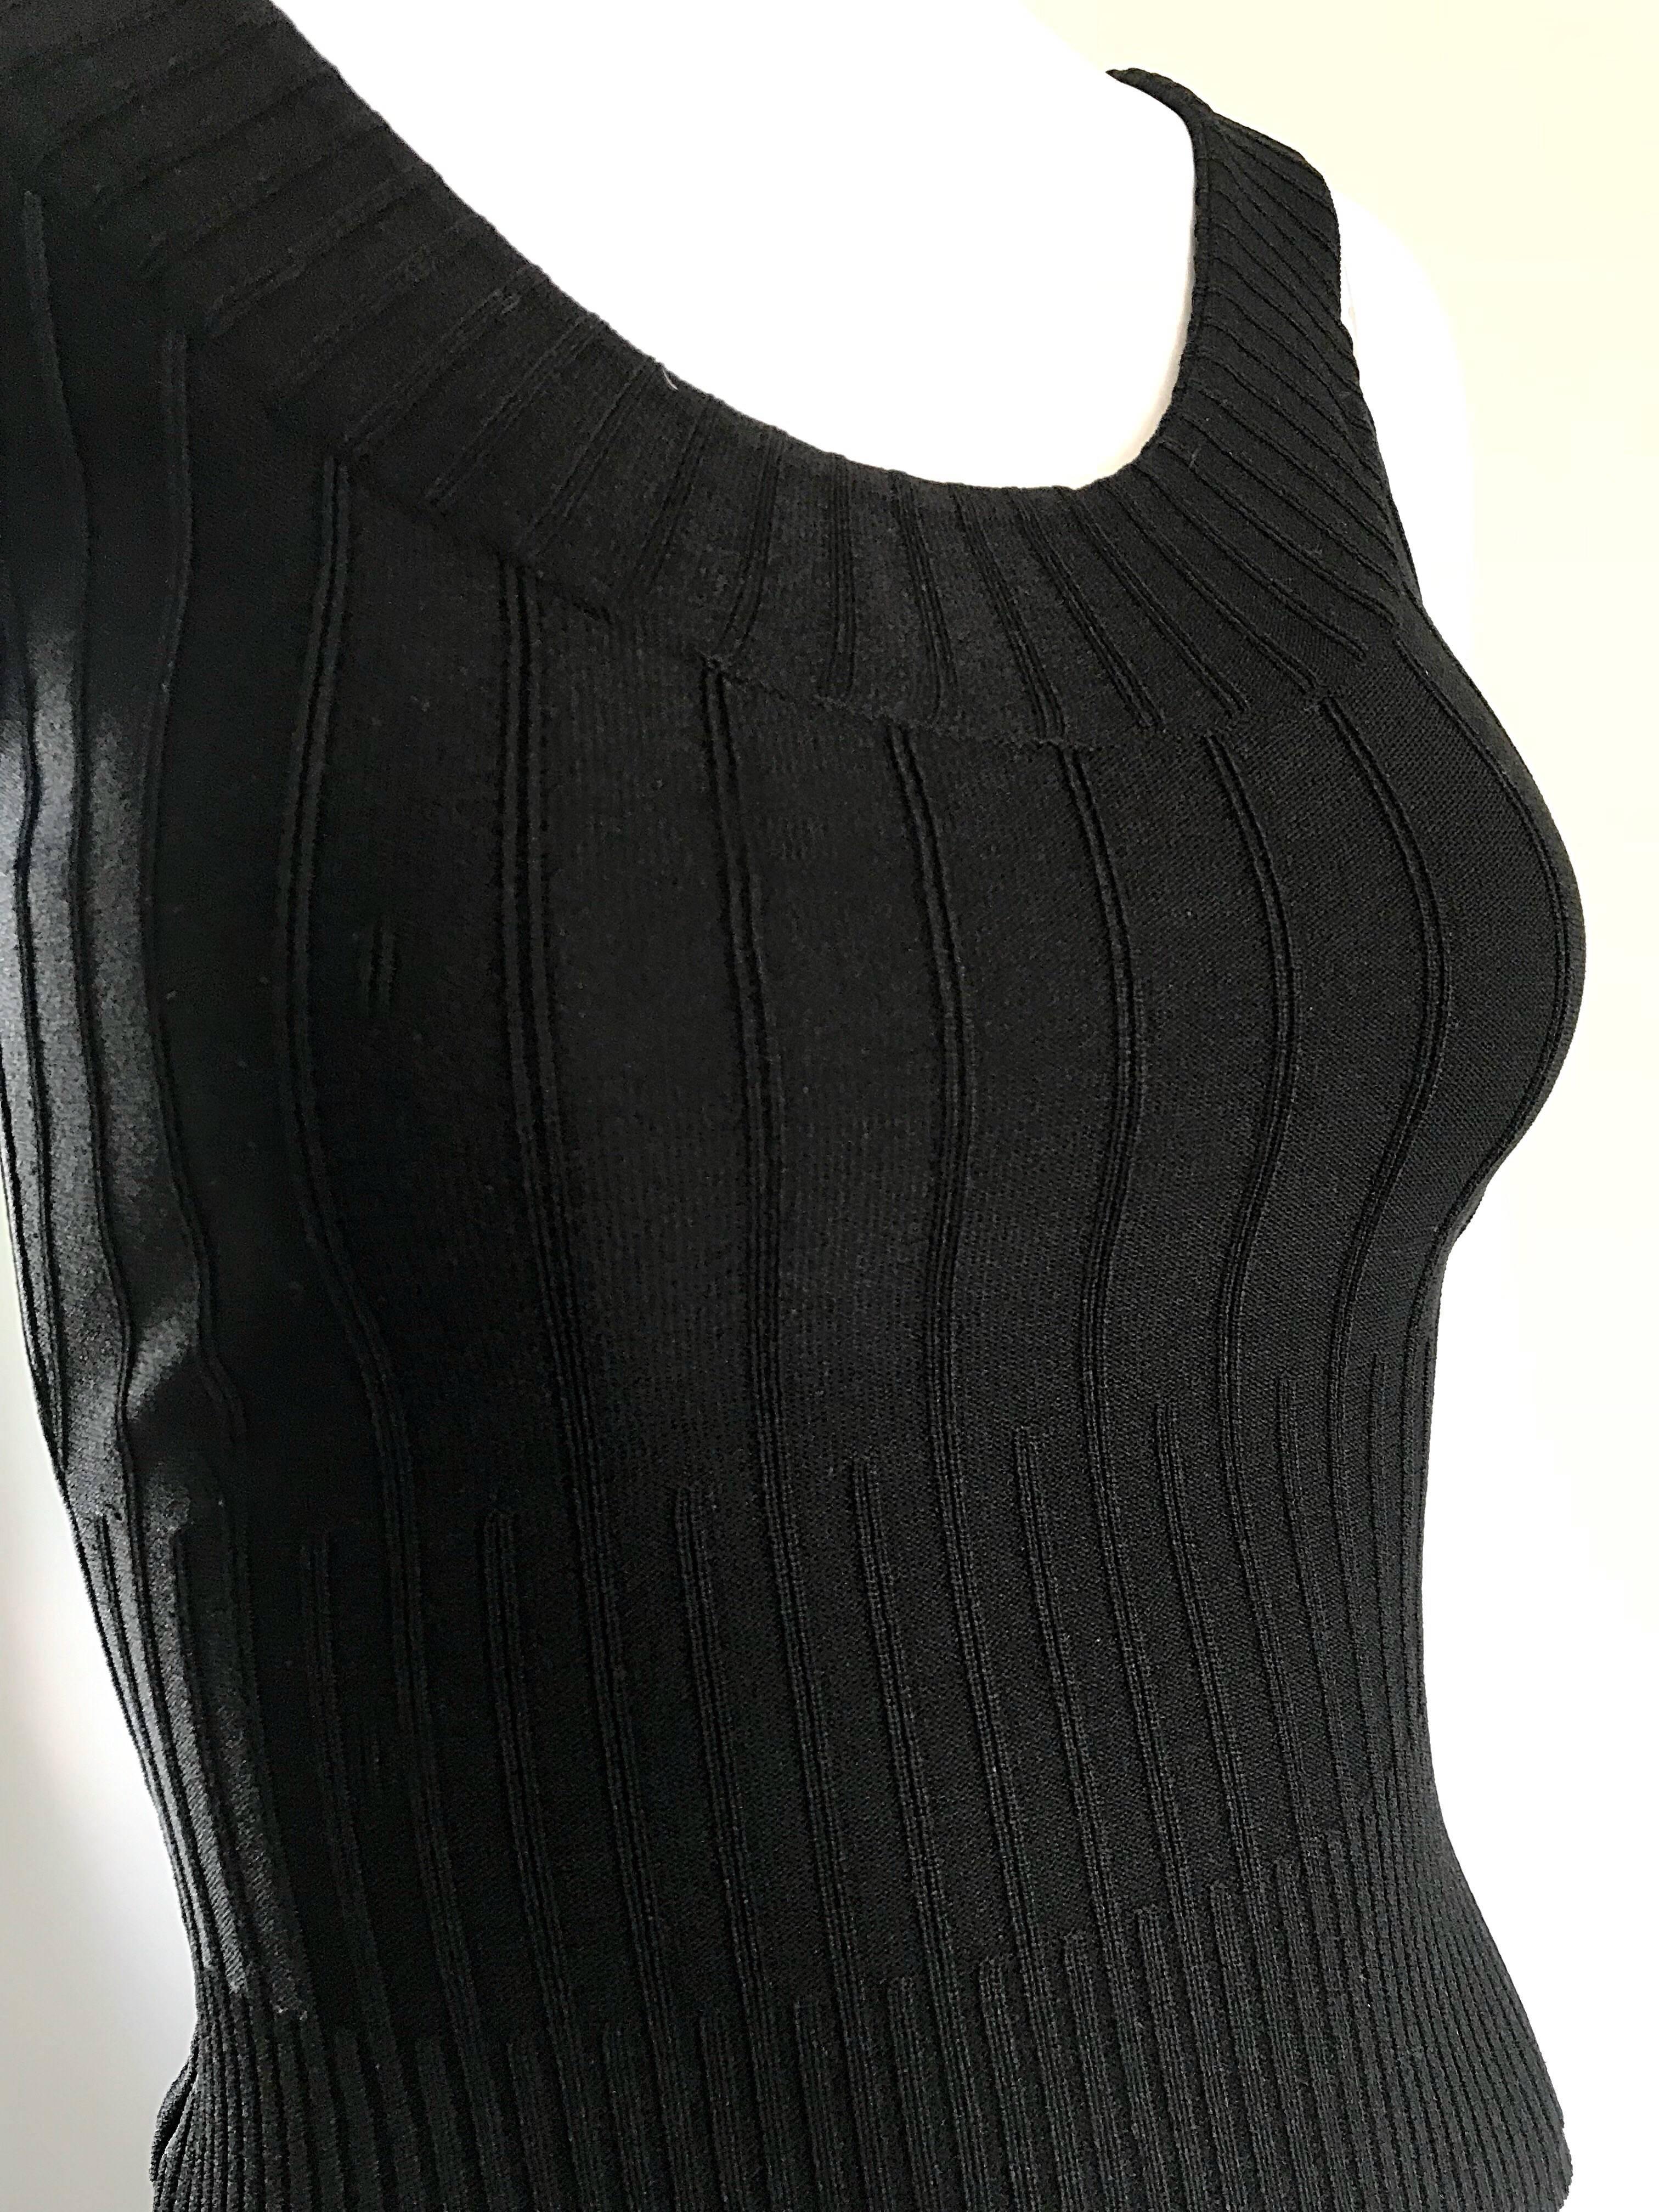 Thierry Mugler Couture 1990 Black Ribbed Sleeveless Vintage 90s Crop Top Shirt en vente 2